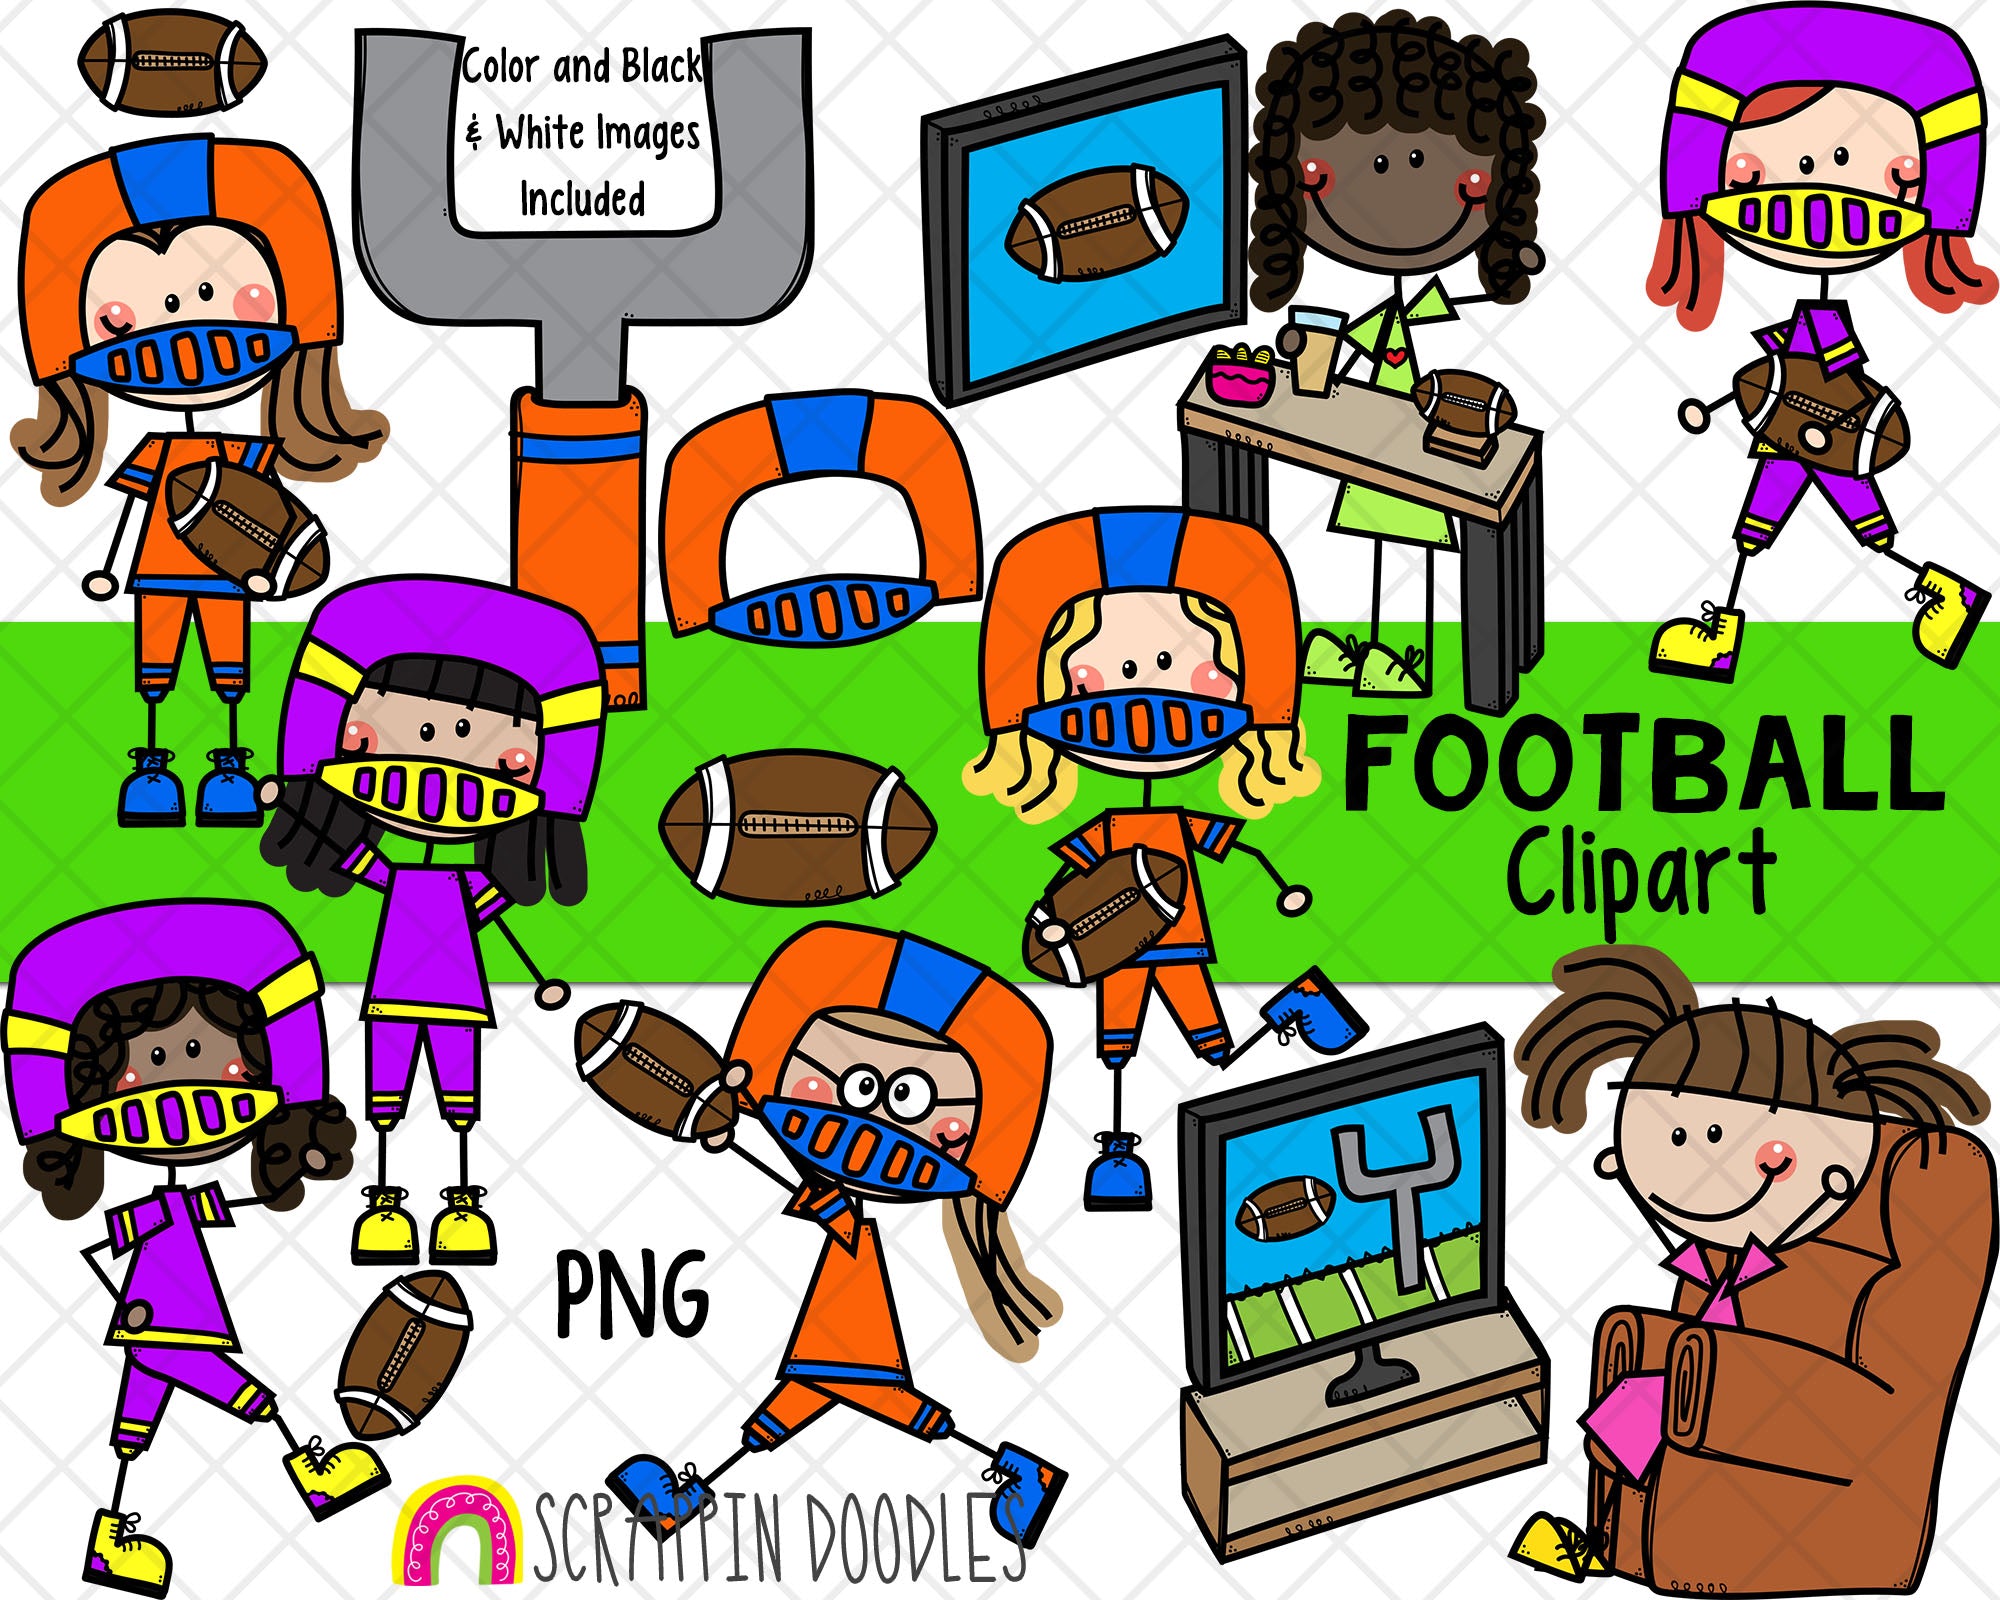 girl sport clipart pictures